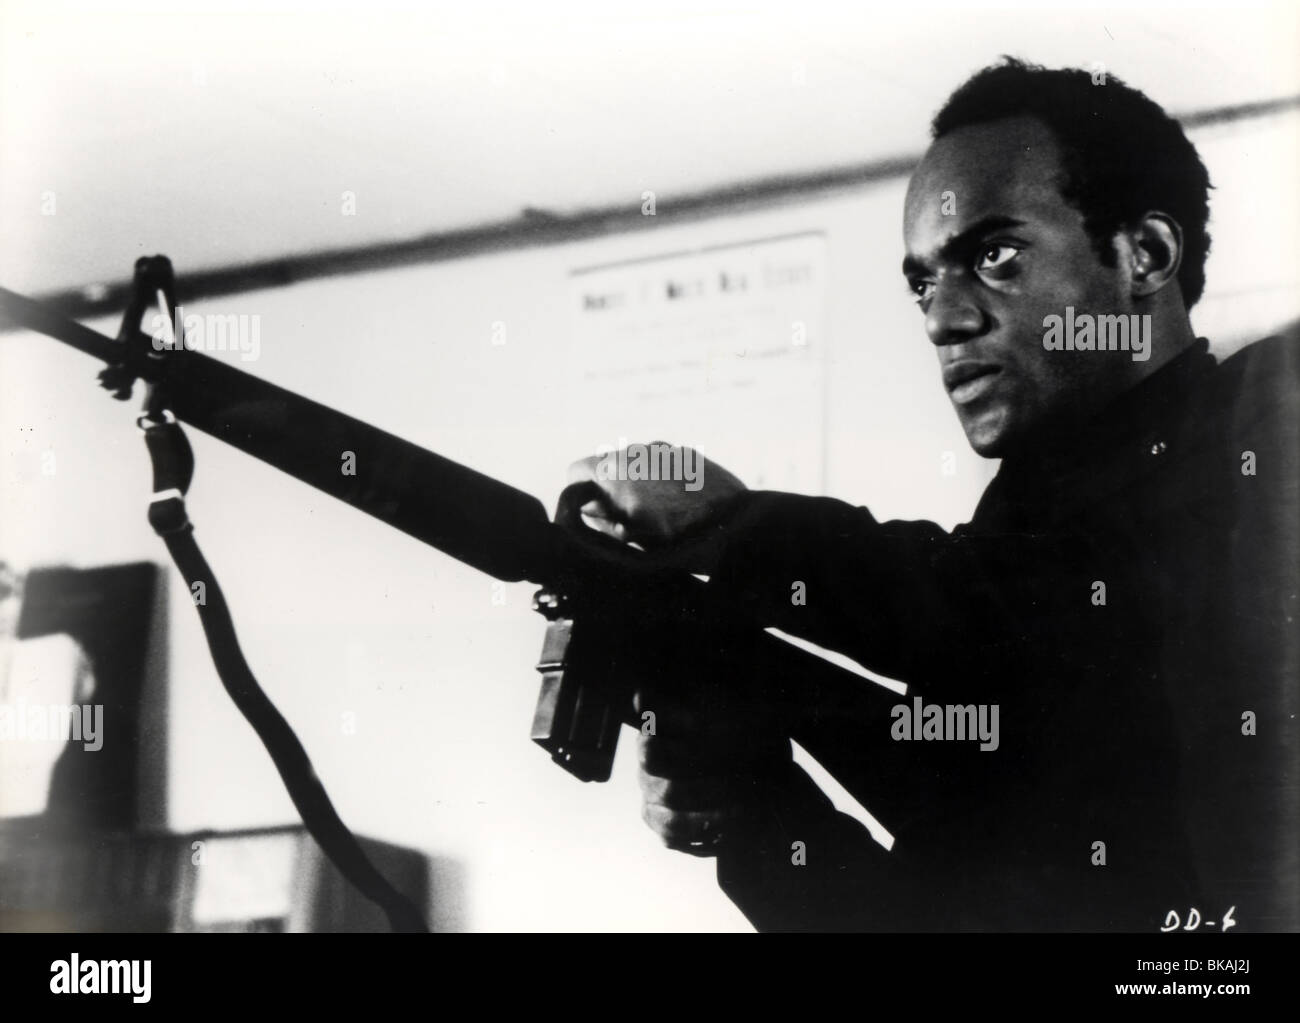 DAWN OF THE DEAD (1978) ZOMBIE (ALT) KEN FOREE DODE 006P Stock Photo